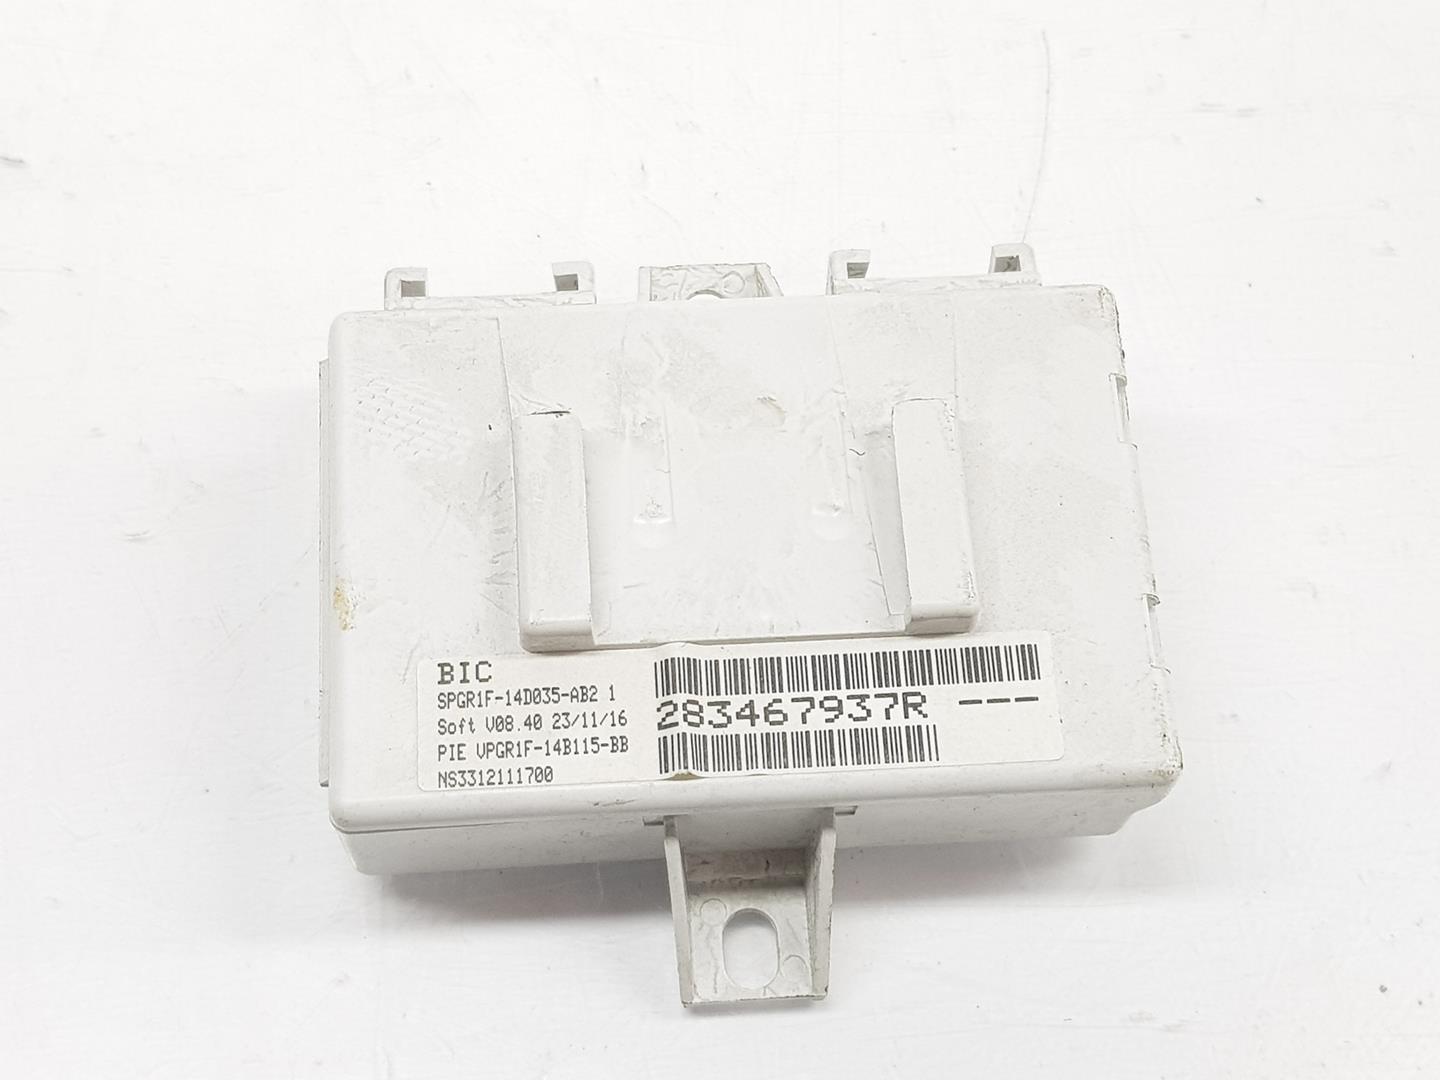 RENAULT Clio 3 generation (2005-2012) Other Control Units 283467937R, 283467937R 22741139